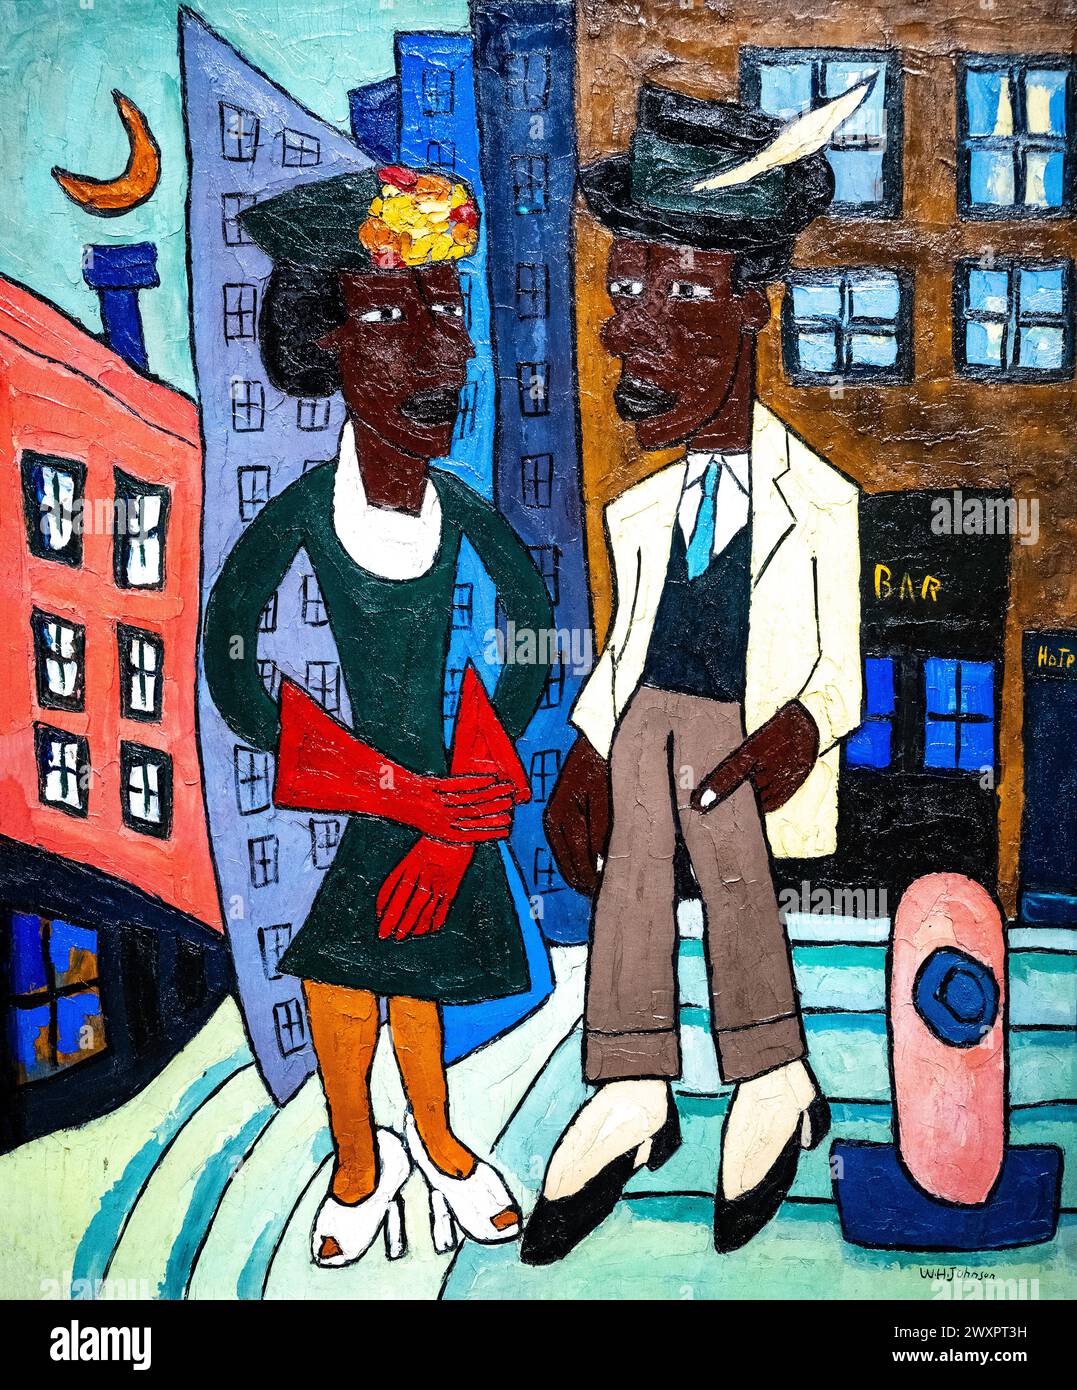 painting by William H. Johnson called Street Life, Harlem done in 1939-40 Stock Photo